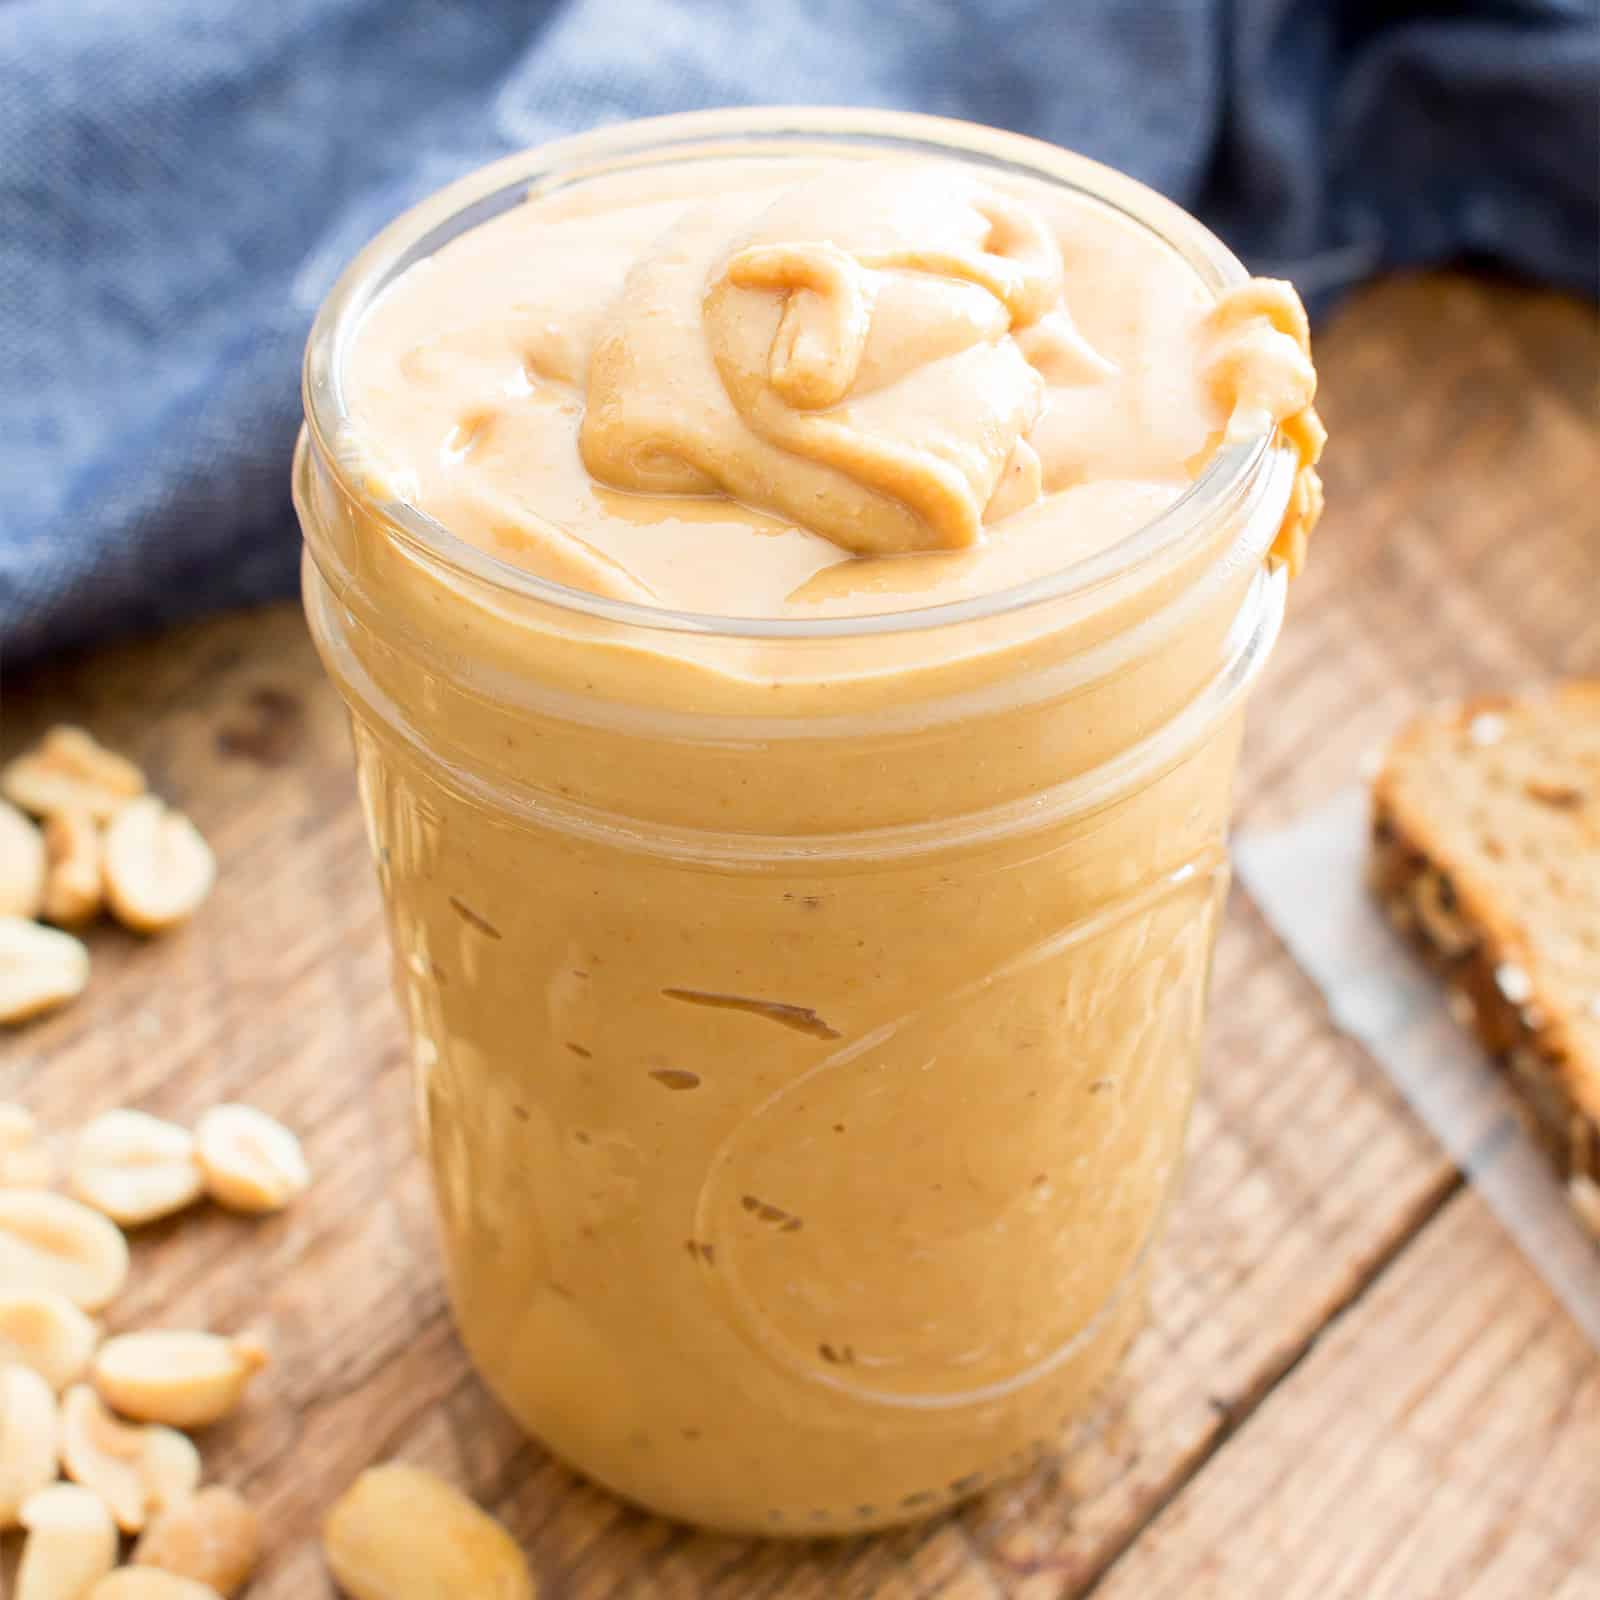 How to Make Homemade Peanut Butter – VIDEO + Photo Tutorial